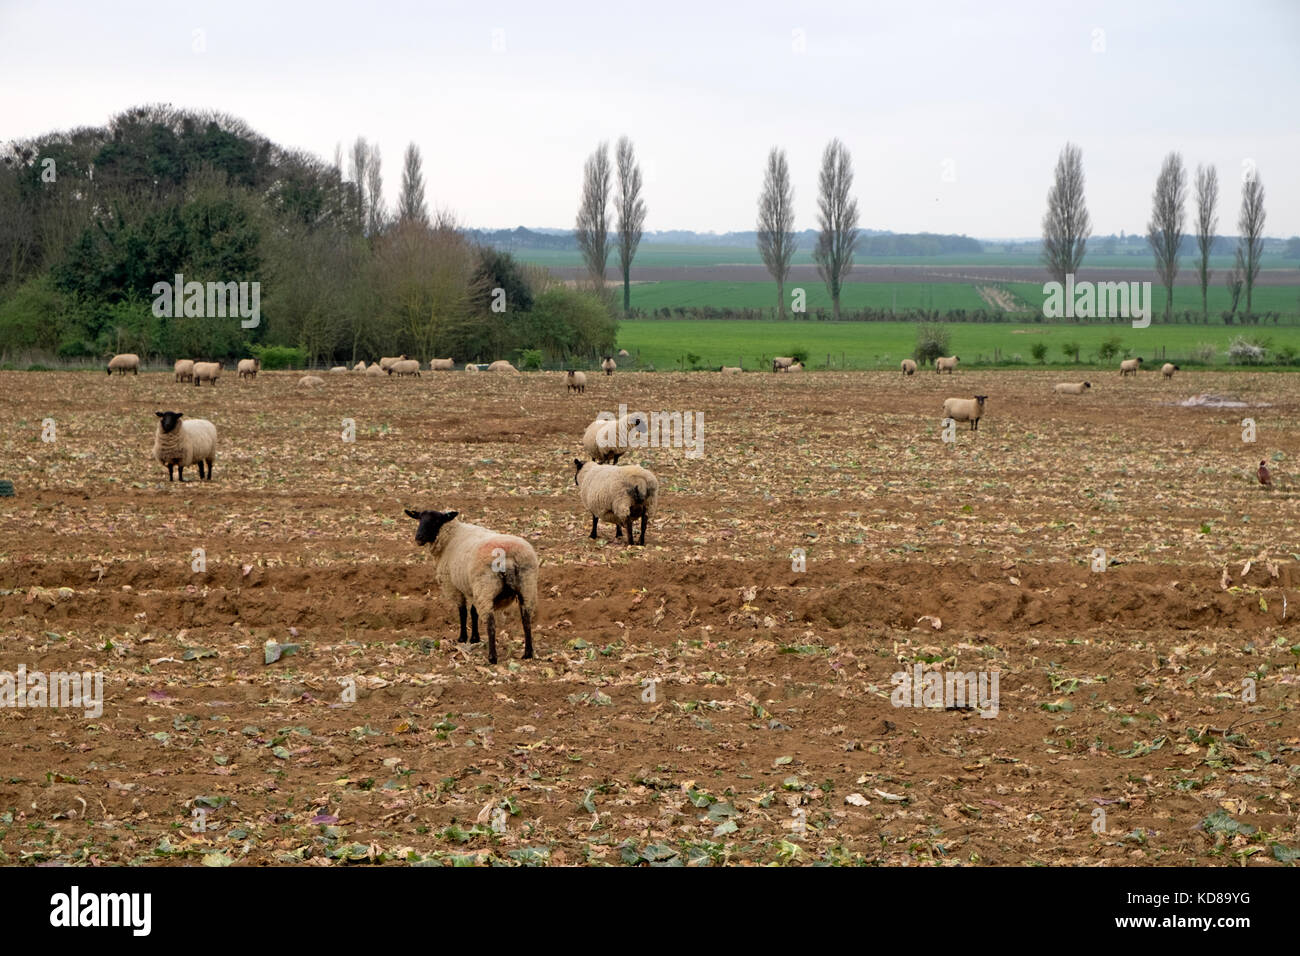 Sheep grazing on harvested cabbage crop Stock Photo